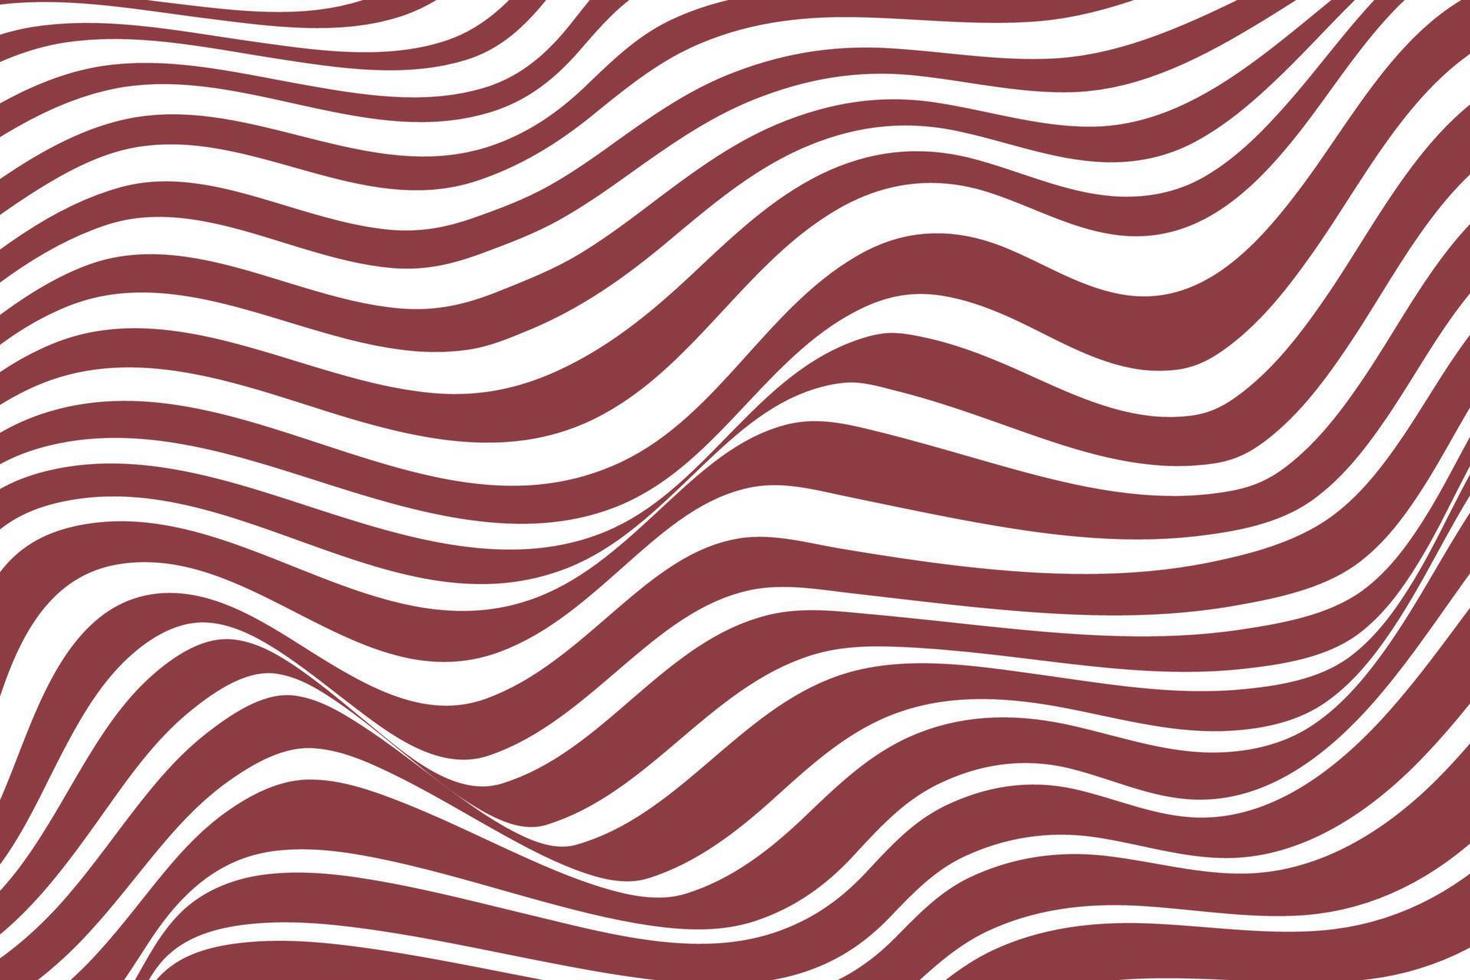 Abstract dynamic wavy lines background vector